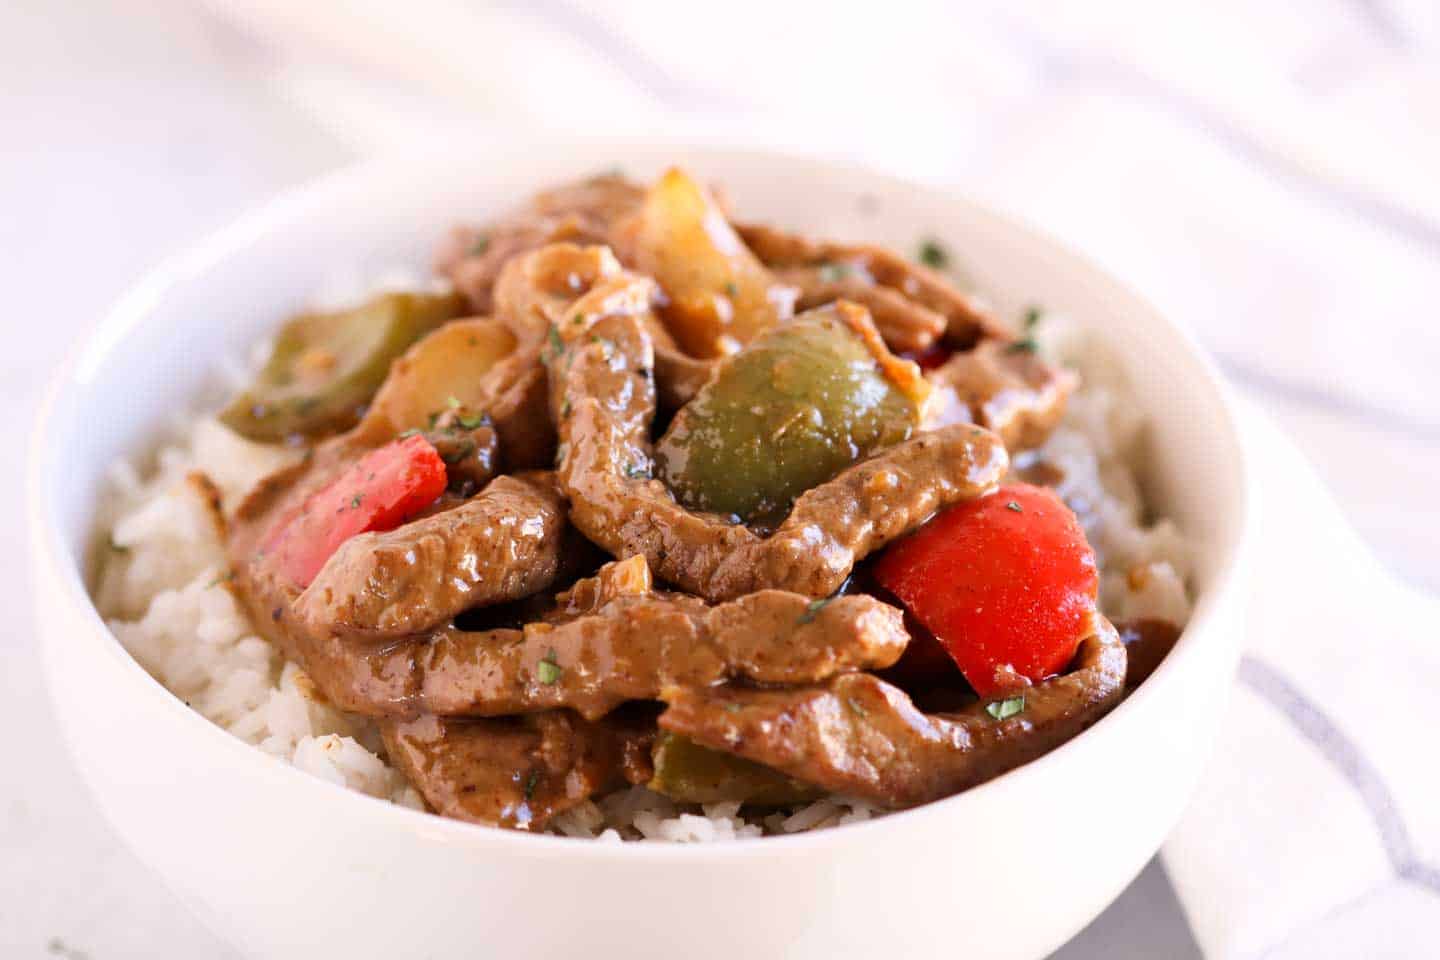 Pepper steak on top of rice in a bowl.